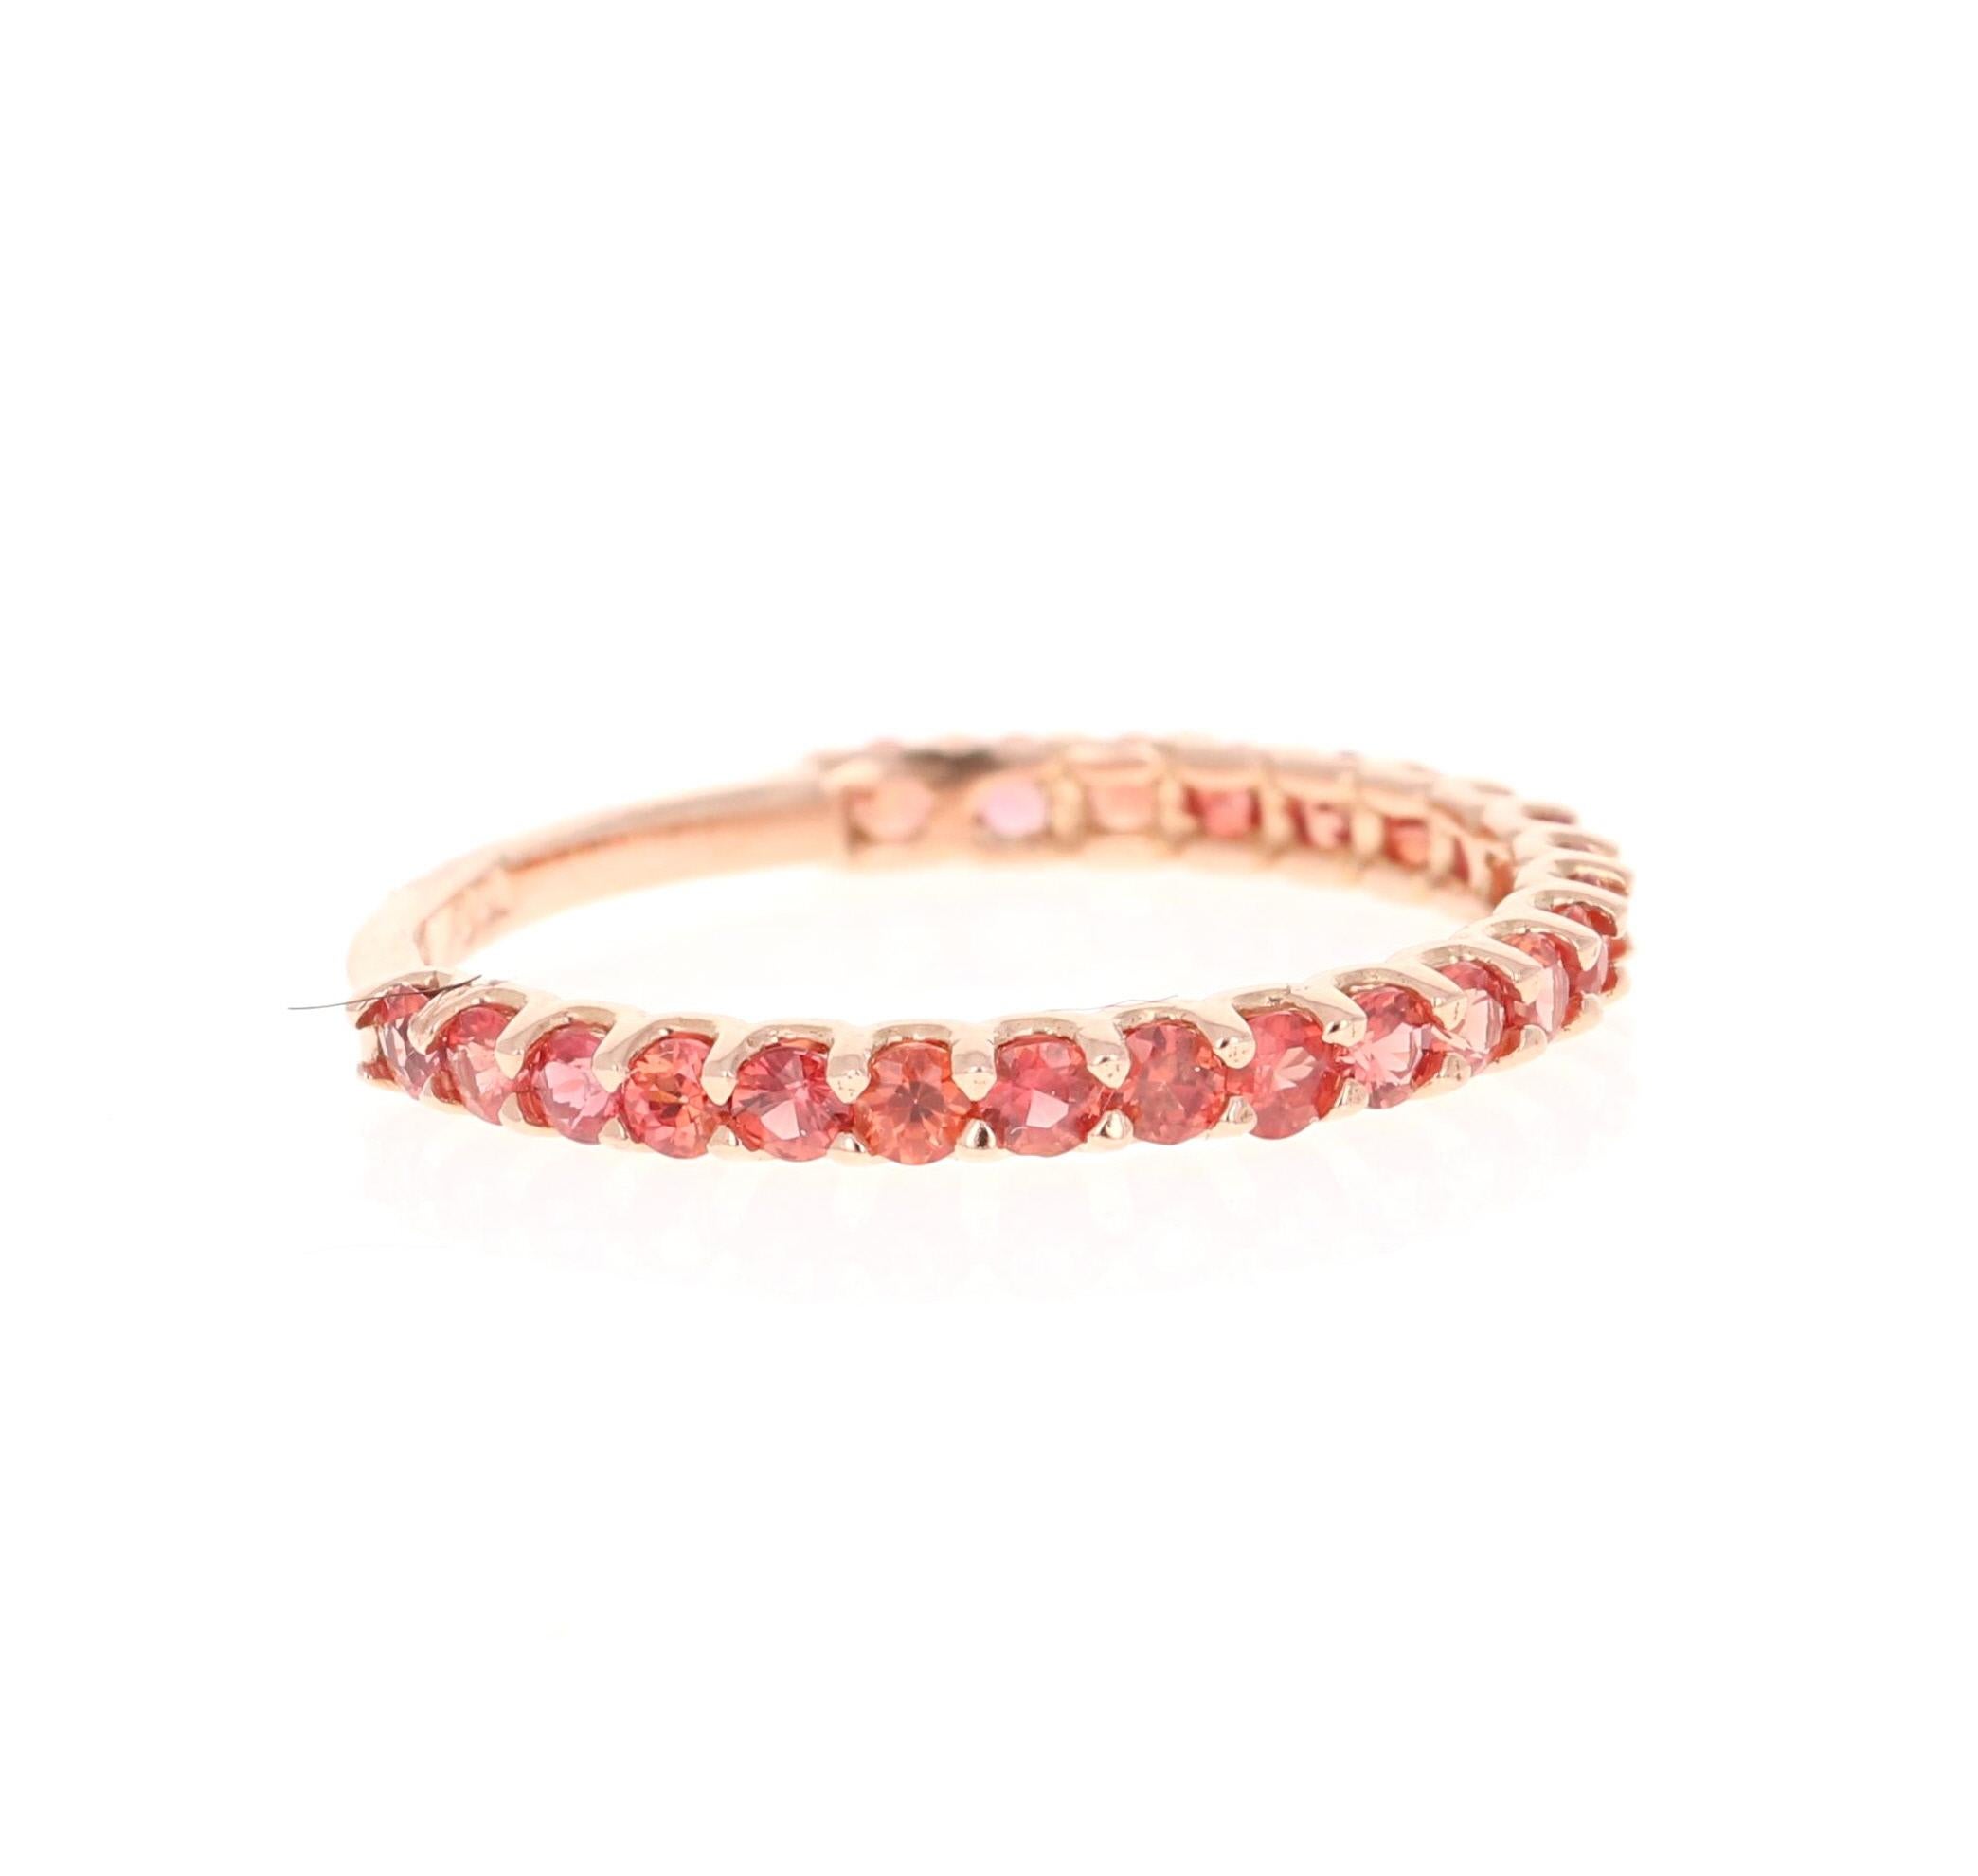 This ring has 23 Natural Round Cut Red Sapphires that weigh 0.85 Carats. 

Crafted in 14 Karat Rose Gold and weighs approximately 1.3 grams 

The ring is a size 7 and can be re-sized at no additional charge!

We have this same ring in White Gold as